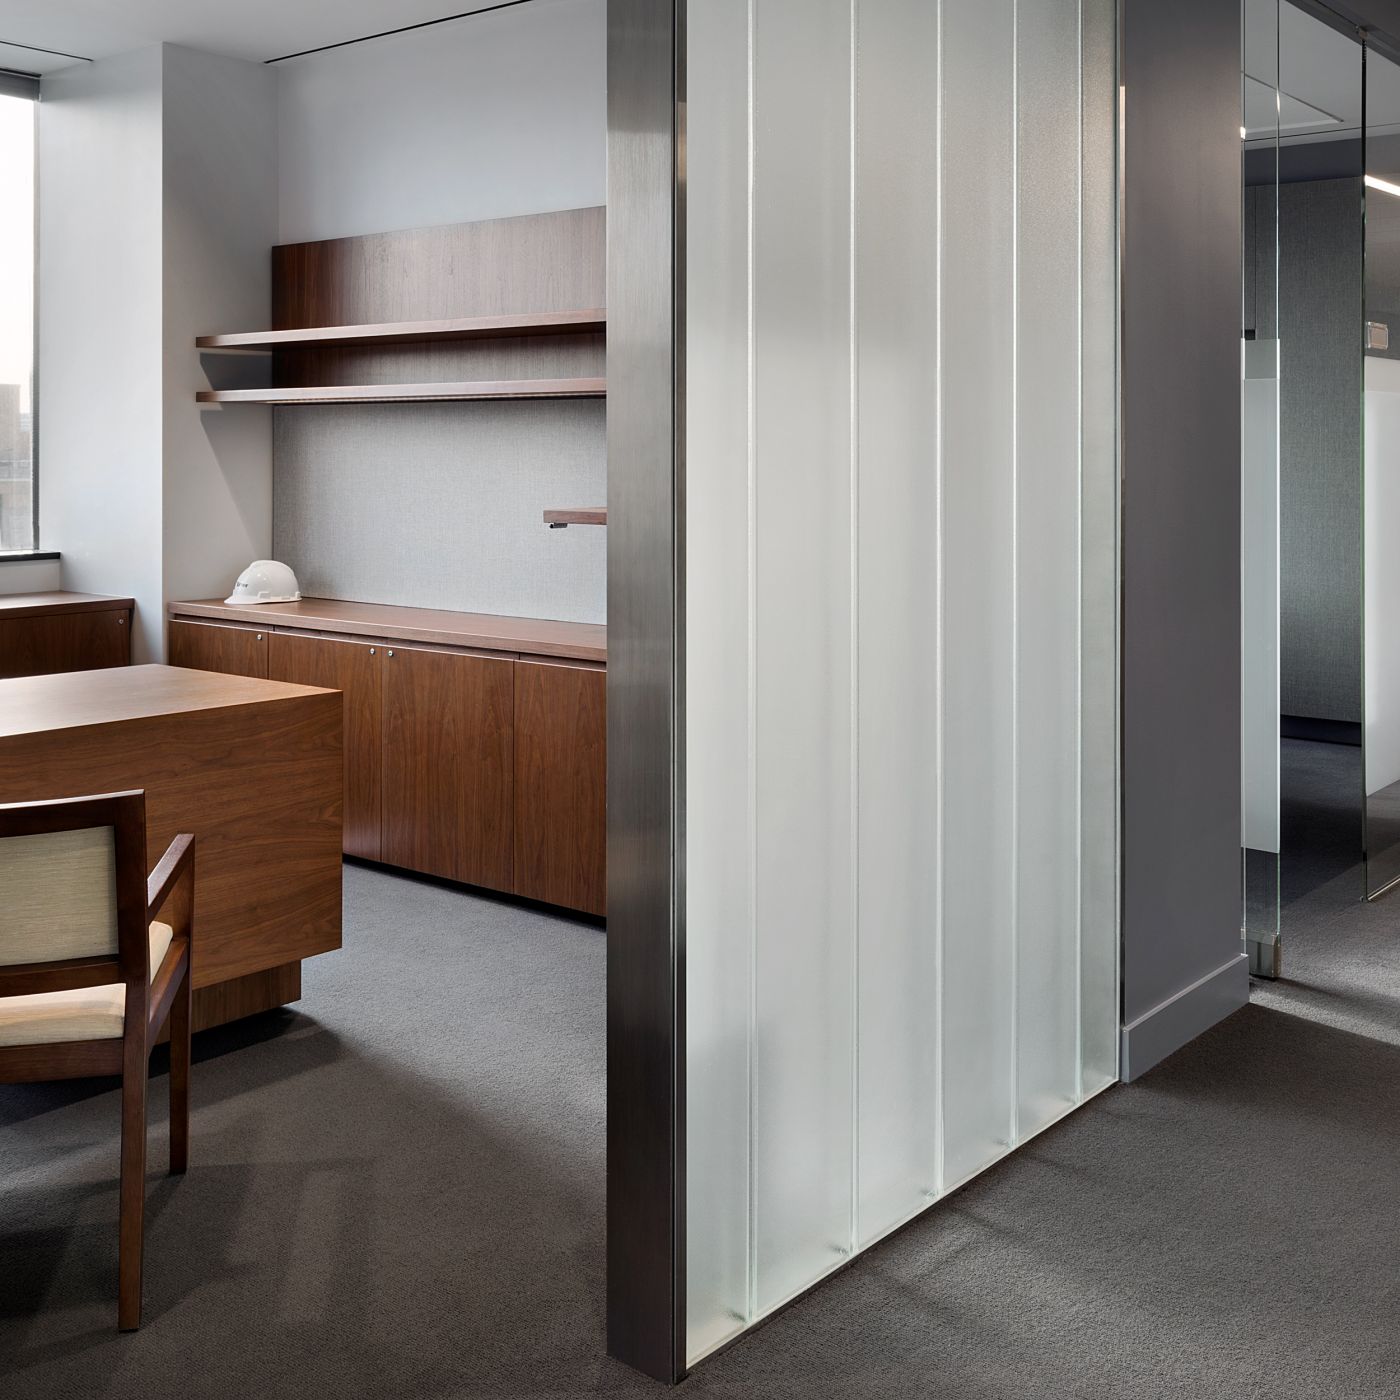 NEW MILLENNIA private offices include adjustable-height desking and continuous floating shelves.